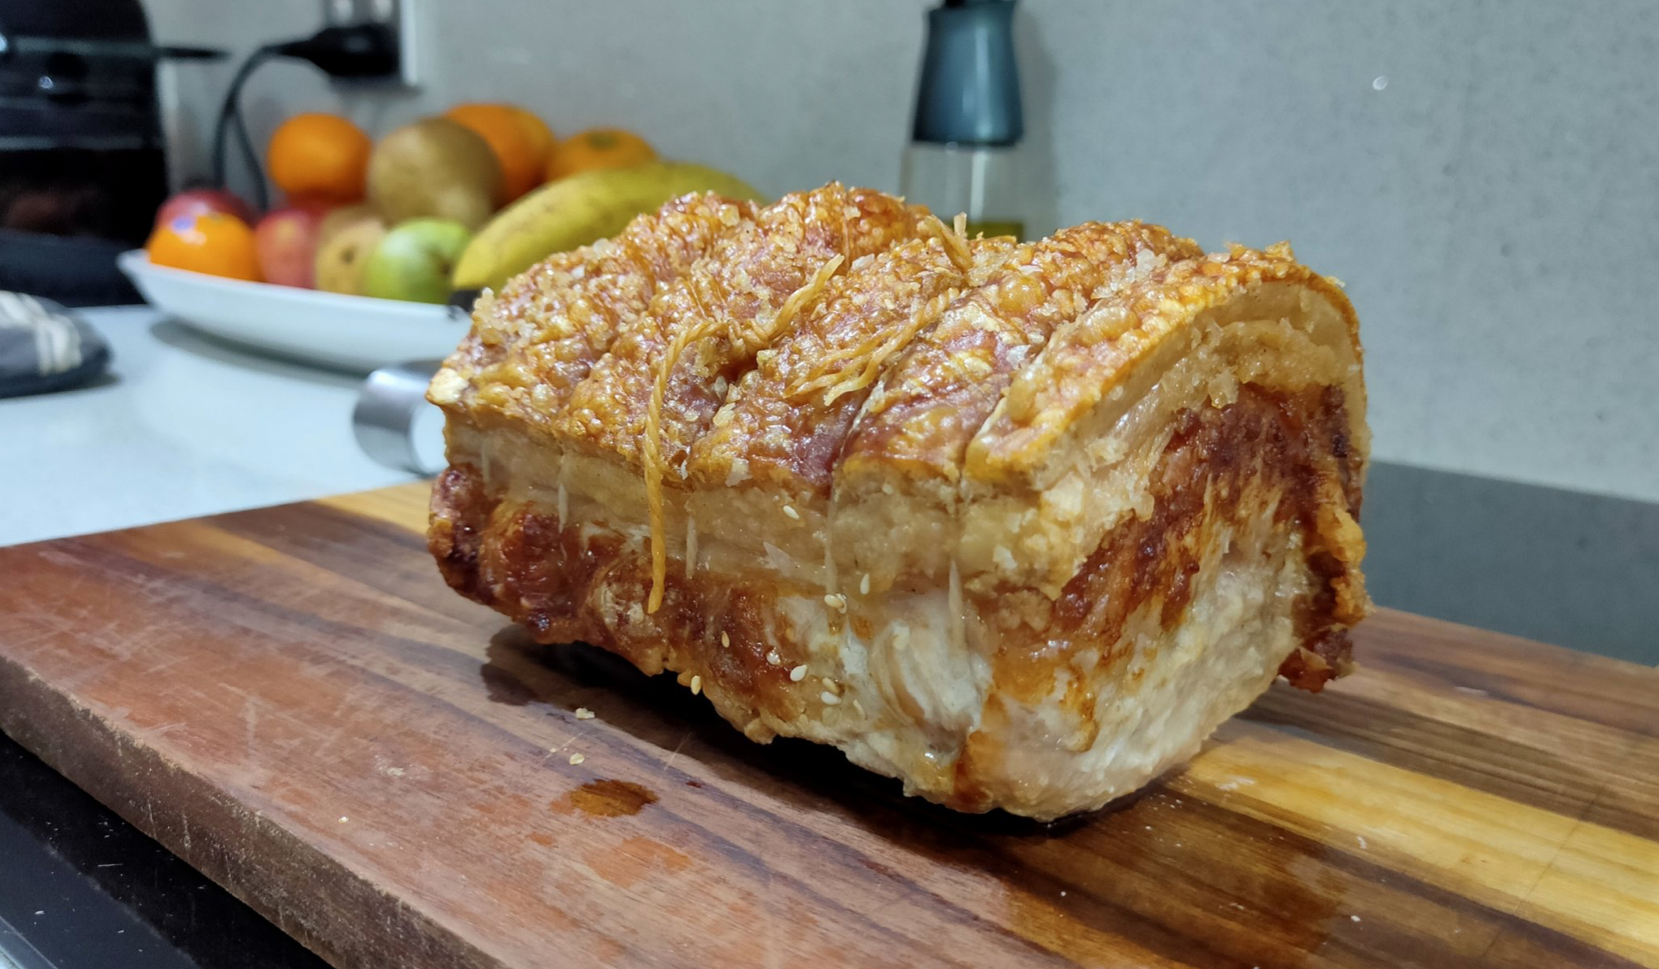 You Can Cook Mouth-Watering Pork Crackling In An Air Fryer